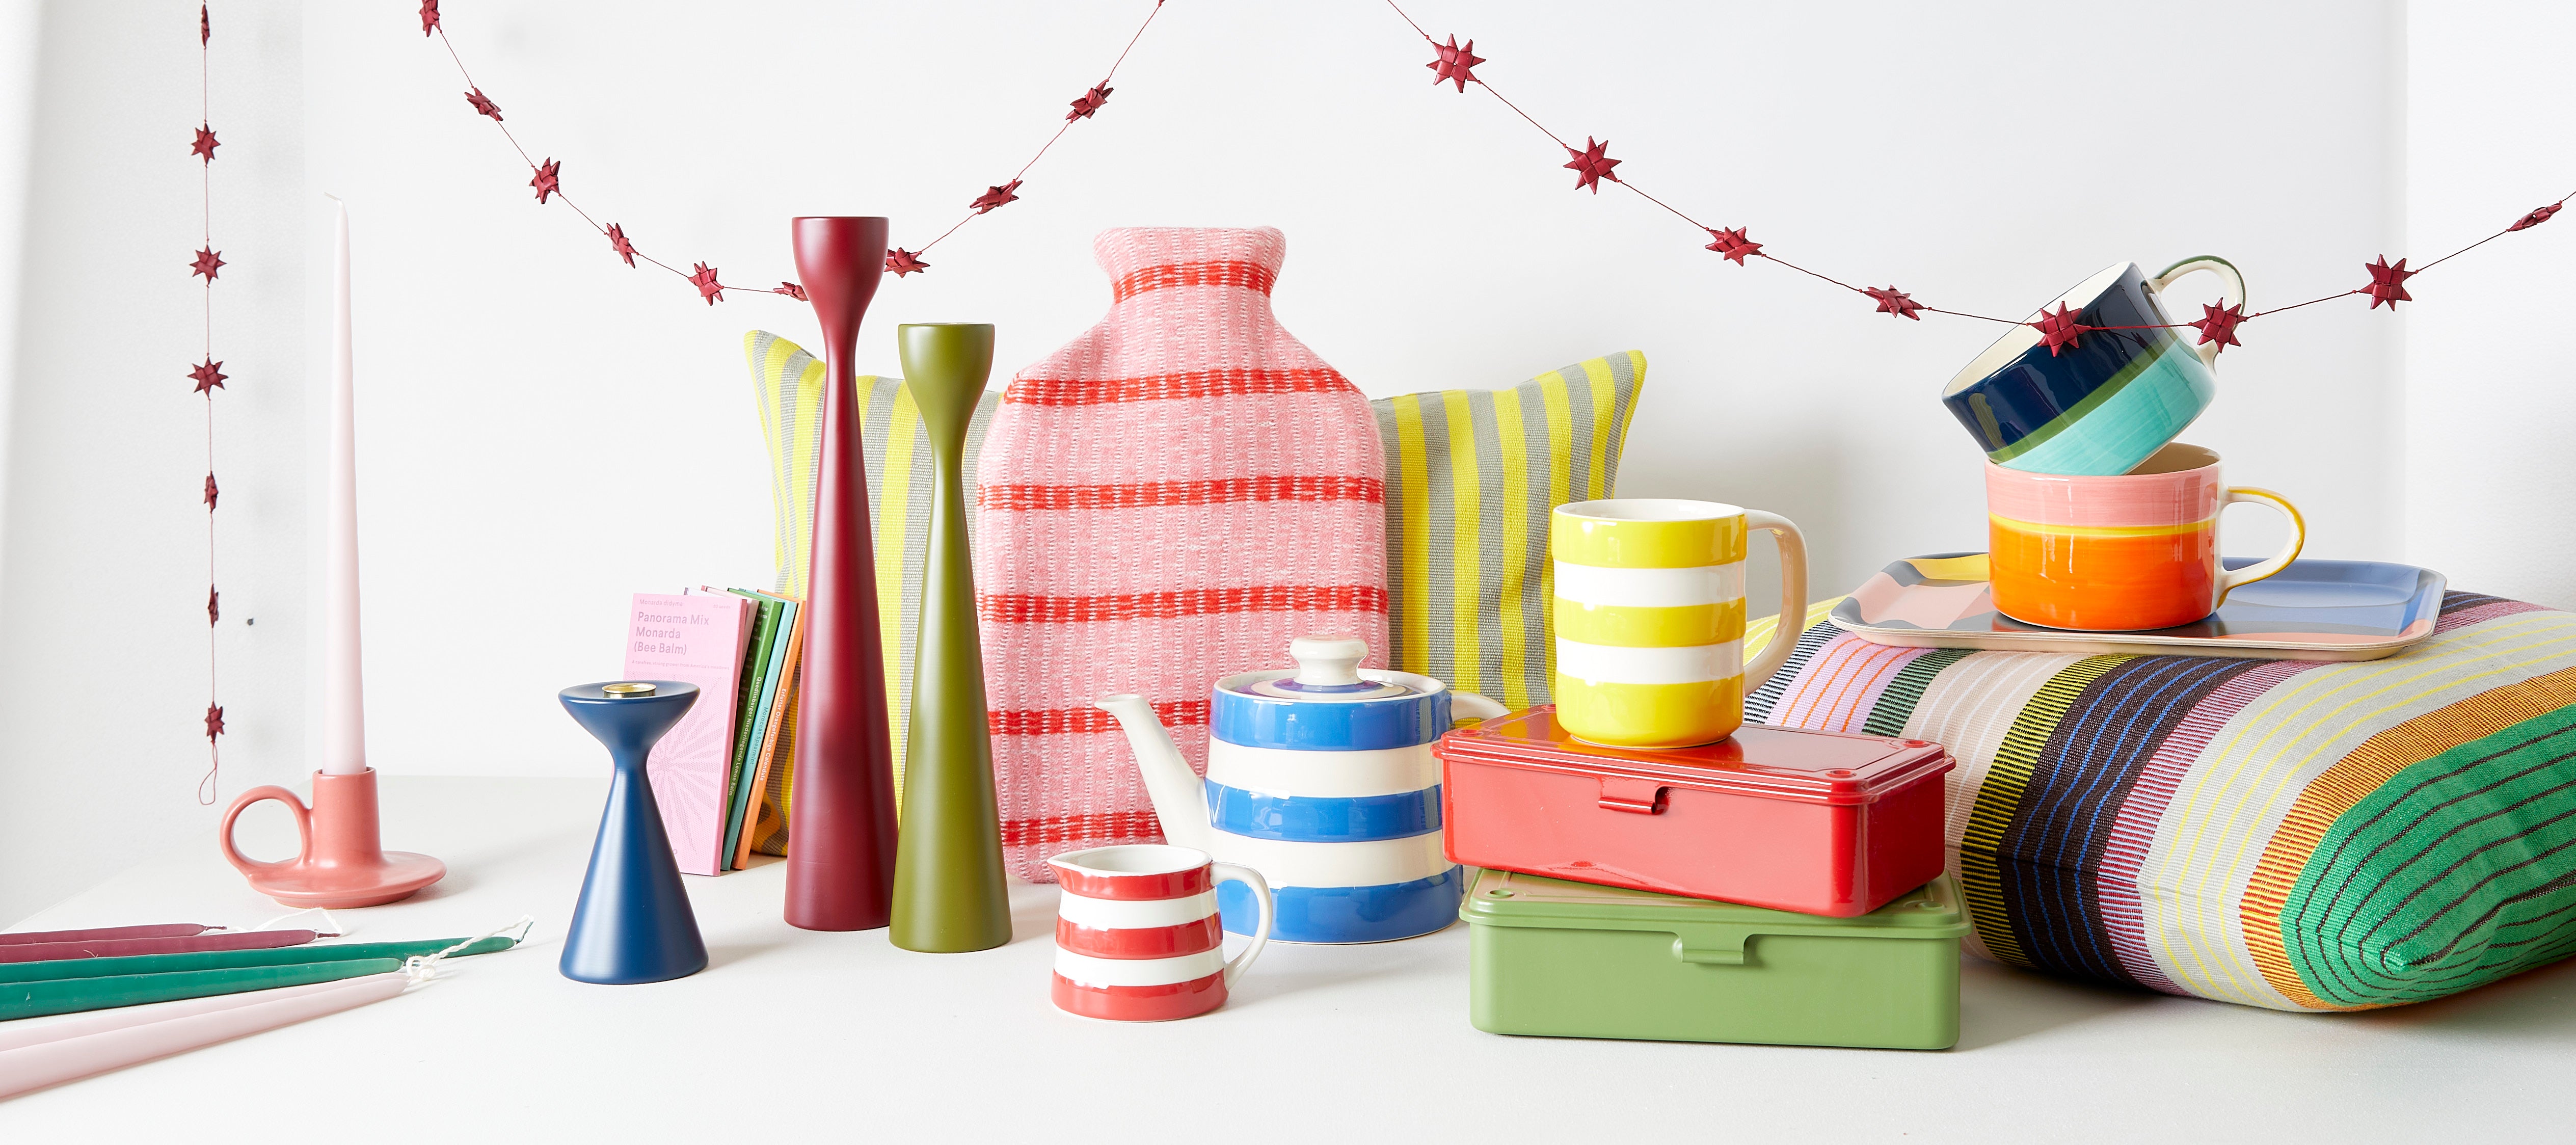 colourful range of products as christmas gift ideas